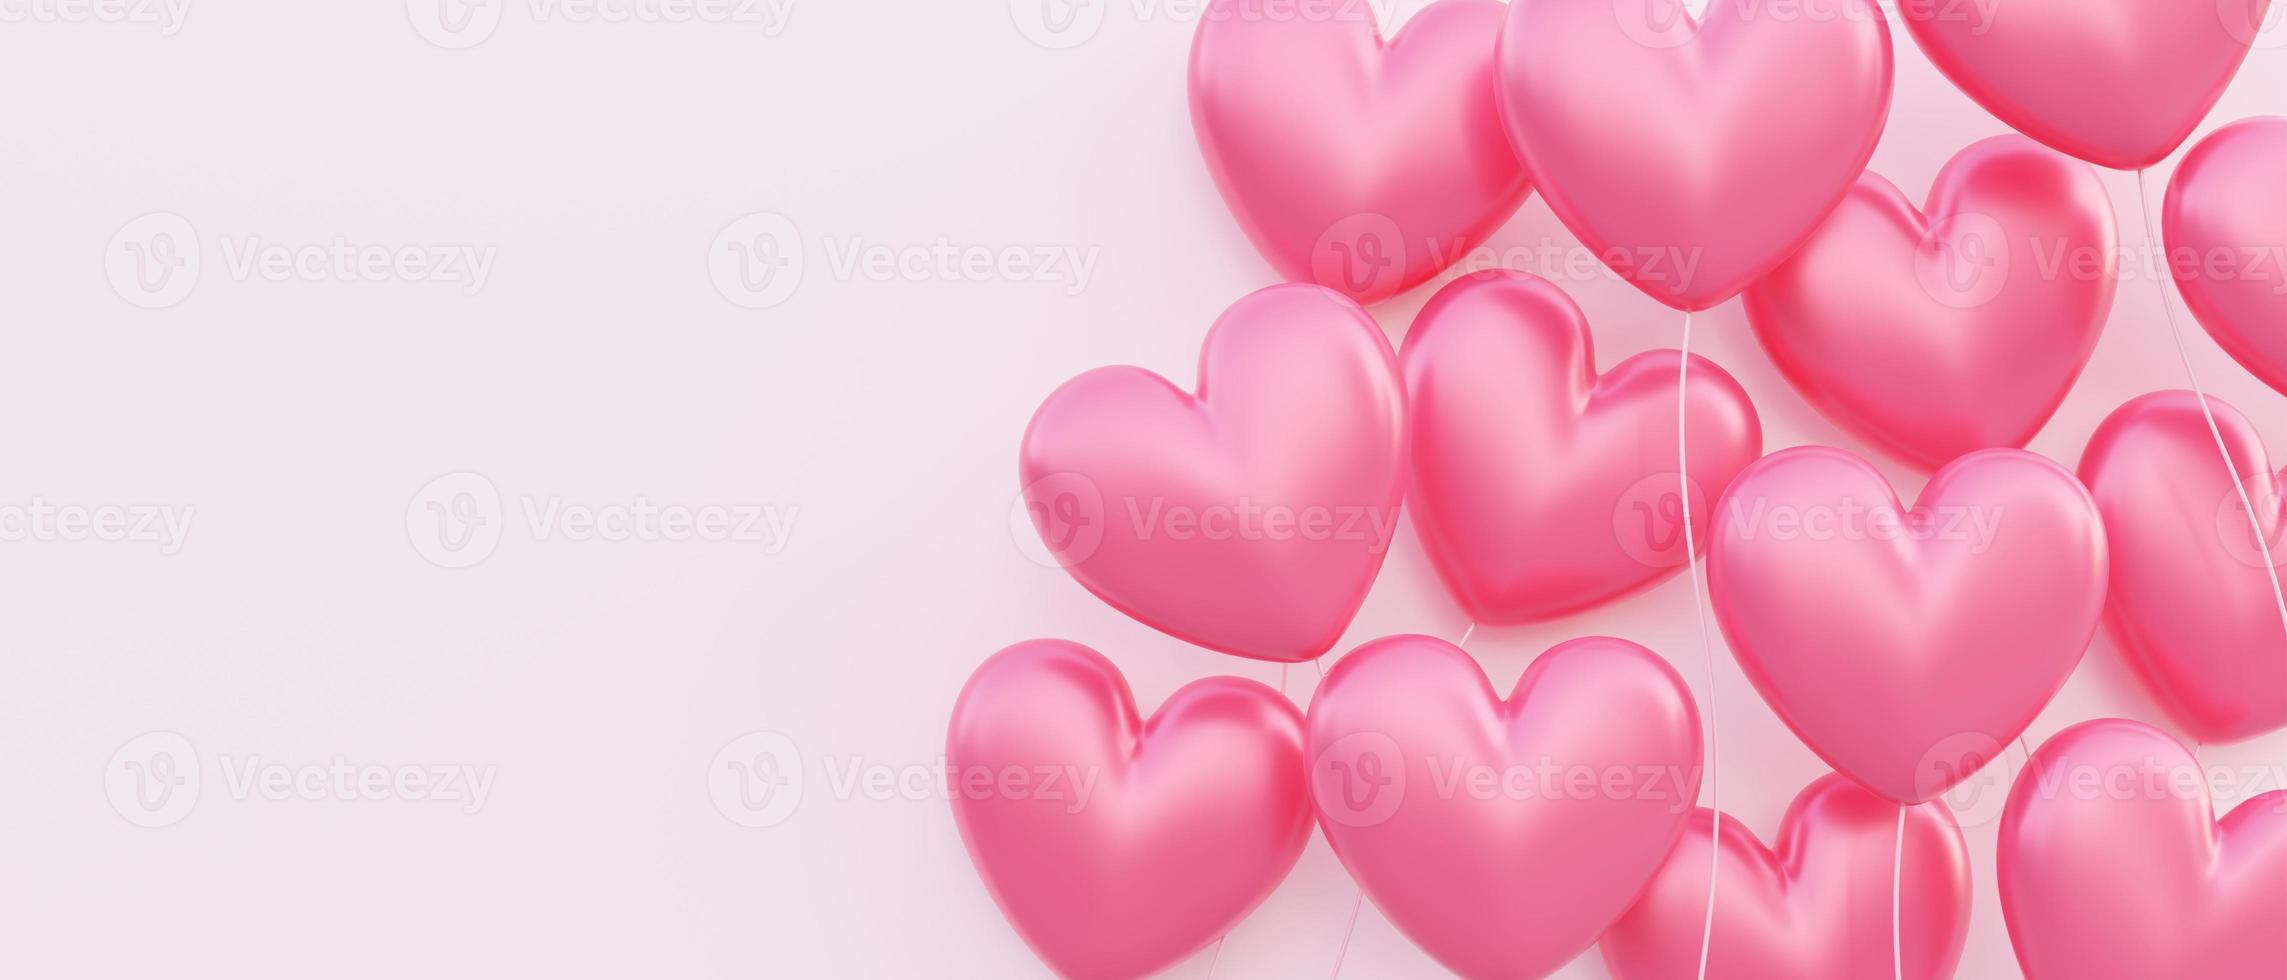 Valentine s day banner background, 3D illustration of red heart shaped balloons floating overlapping photo